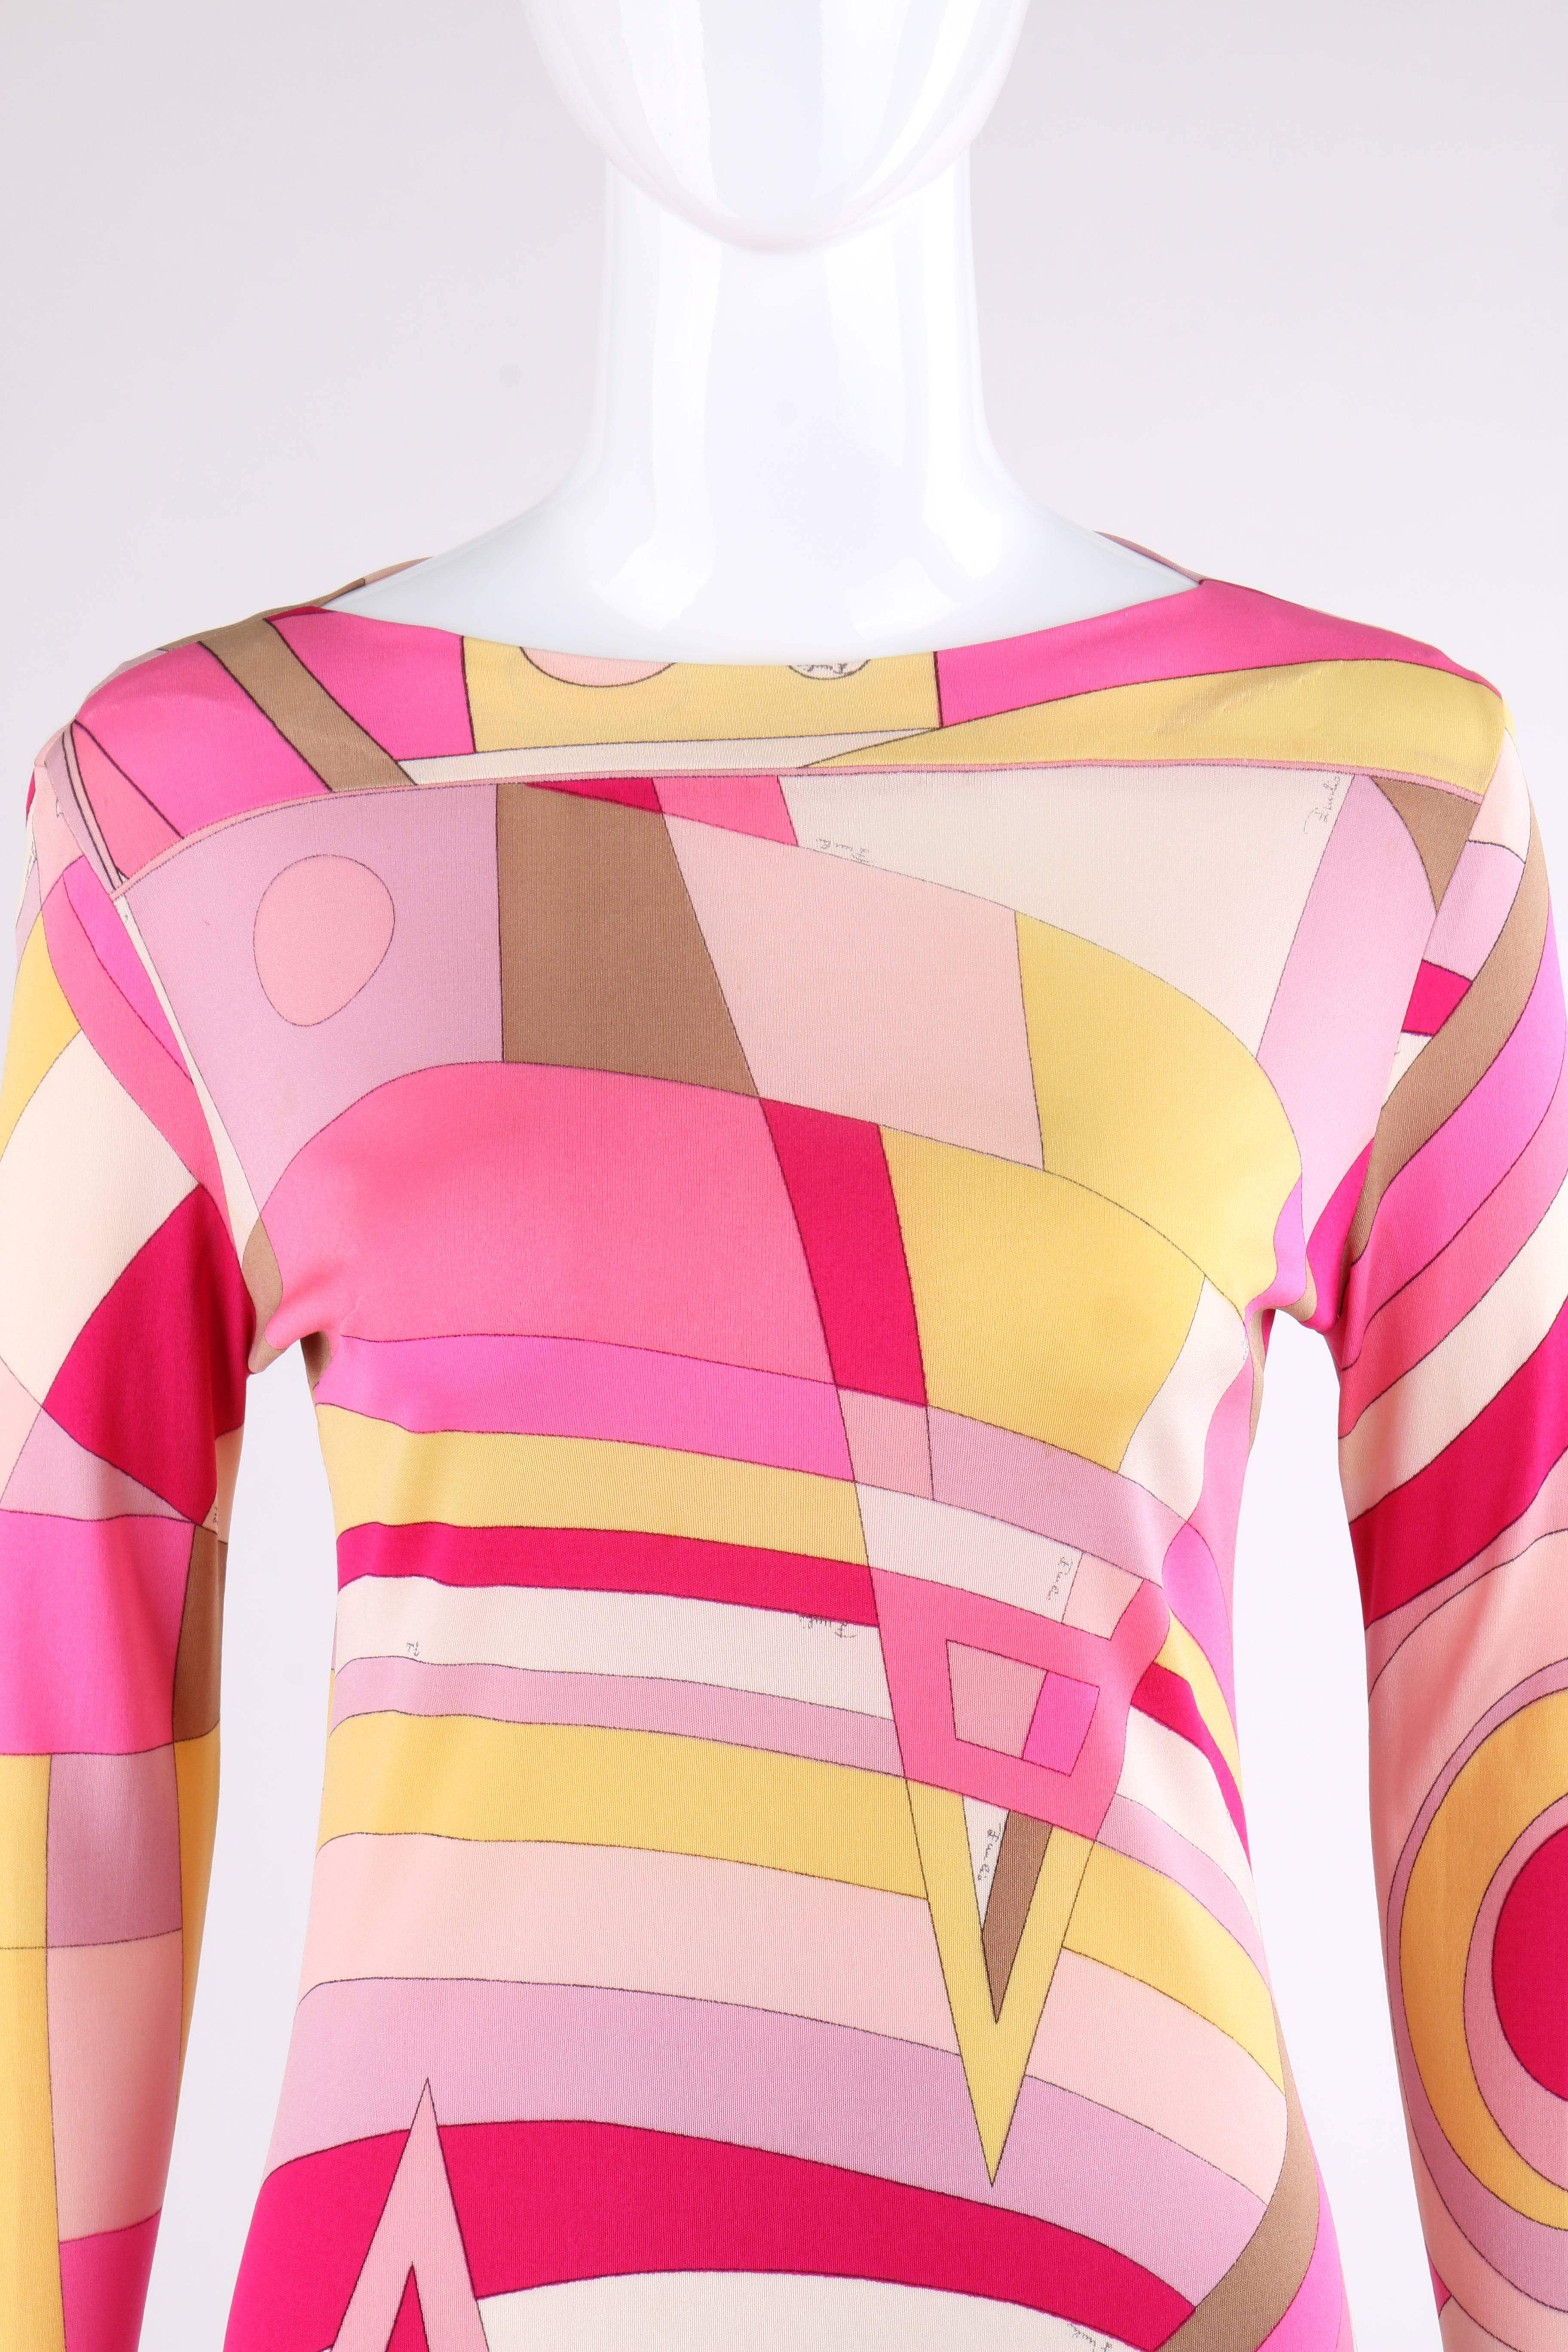 EMILIO PUCCI c.1968 Pink Multicolor Op Art Signature Print Silk Shift Dress In Excellent Condition For Sale In Thiensville, WI